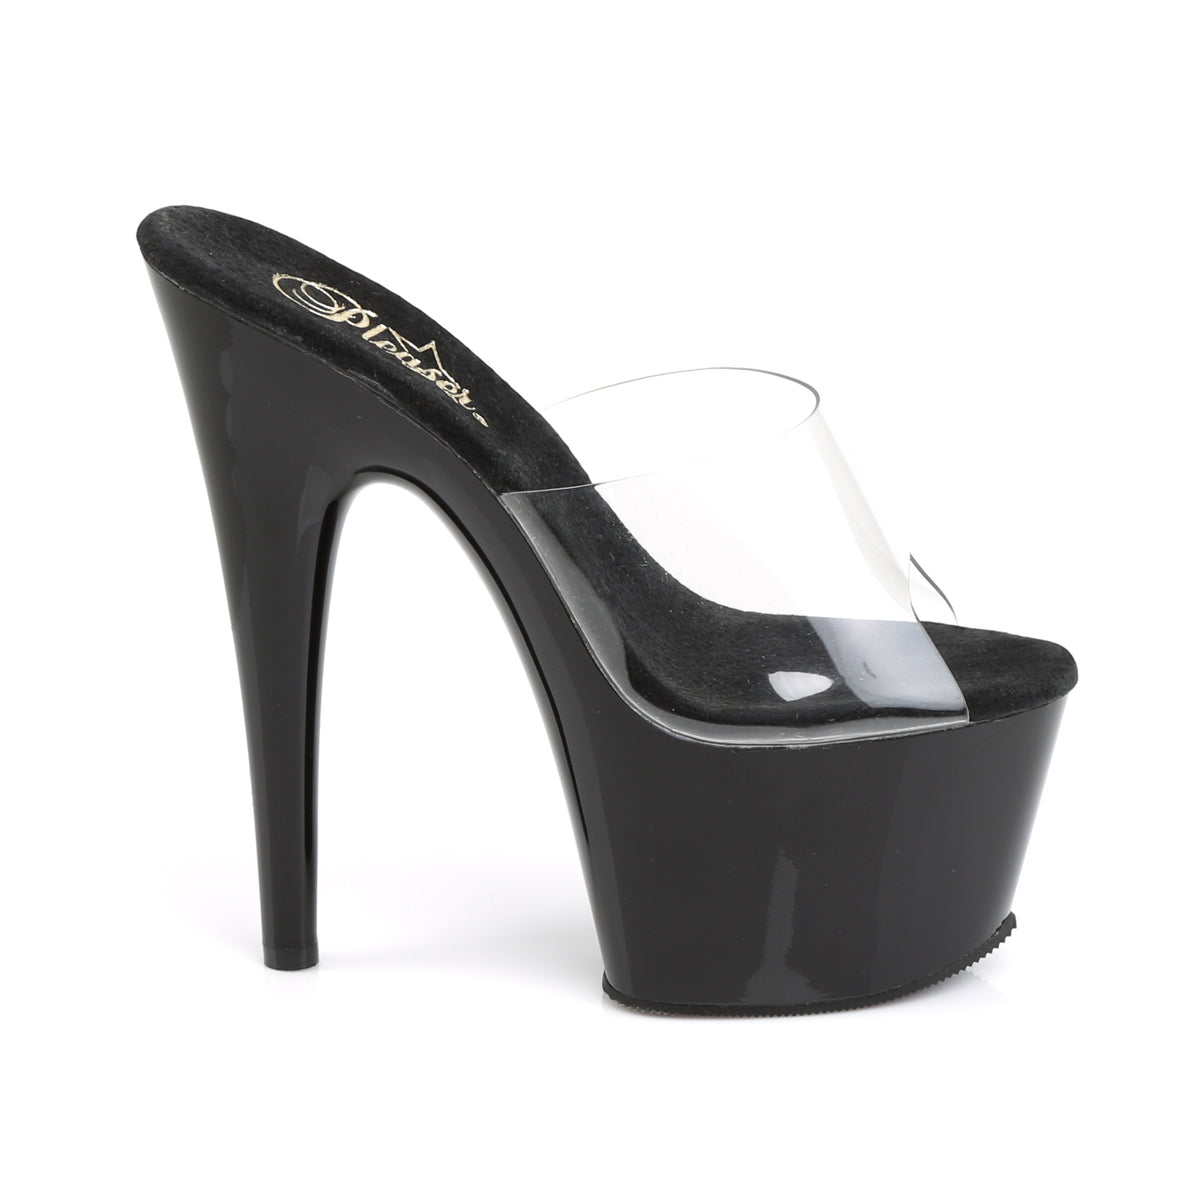 ADORE-701 / C / B 7 "PLEASER FAST DELIVERY 24-48h 